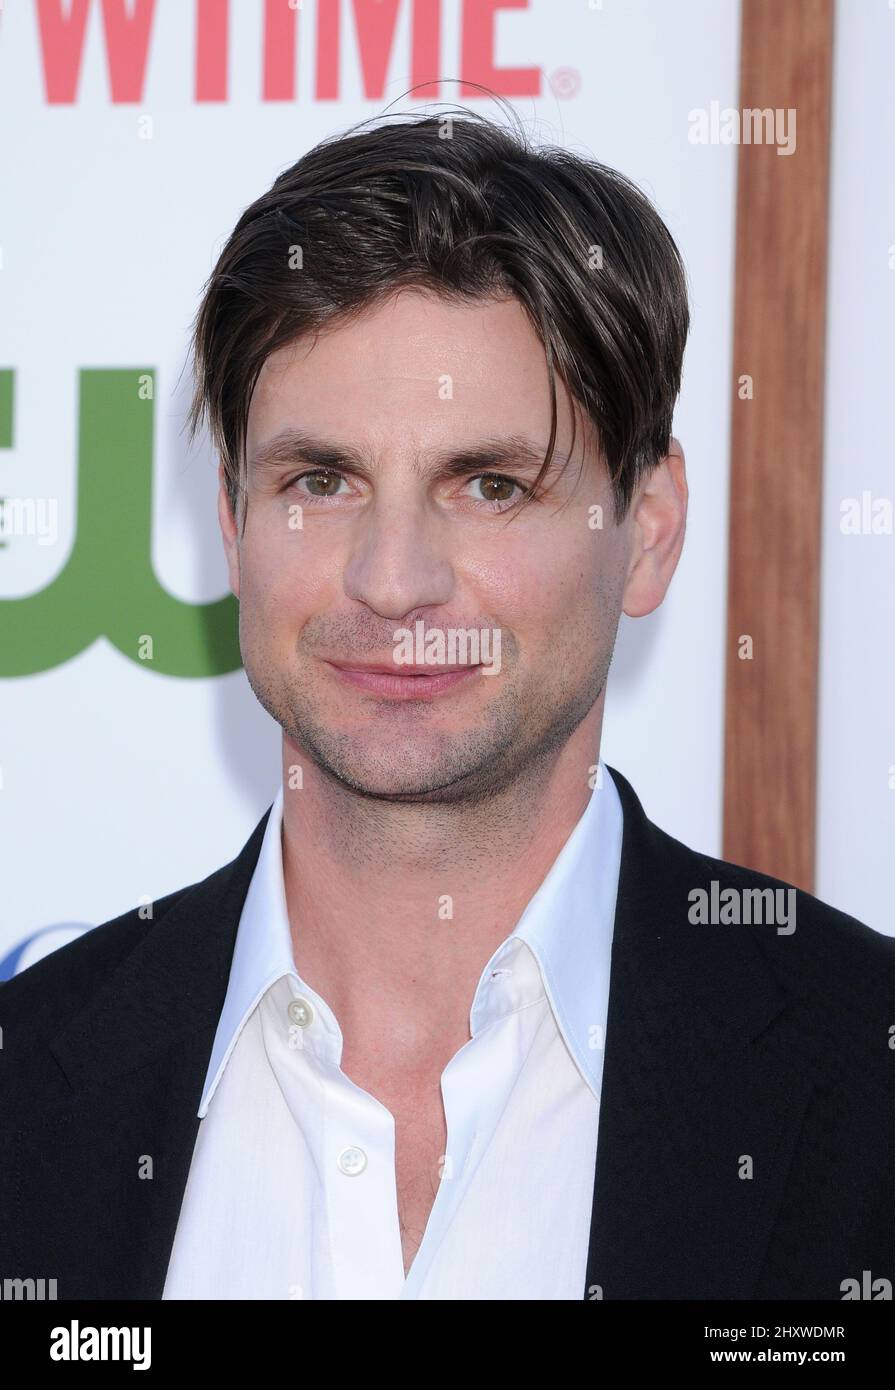 Gale Harold during the CBS,The CW And Showtime TCA Party held at The Pagoda, California Stock Photo